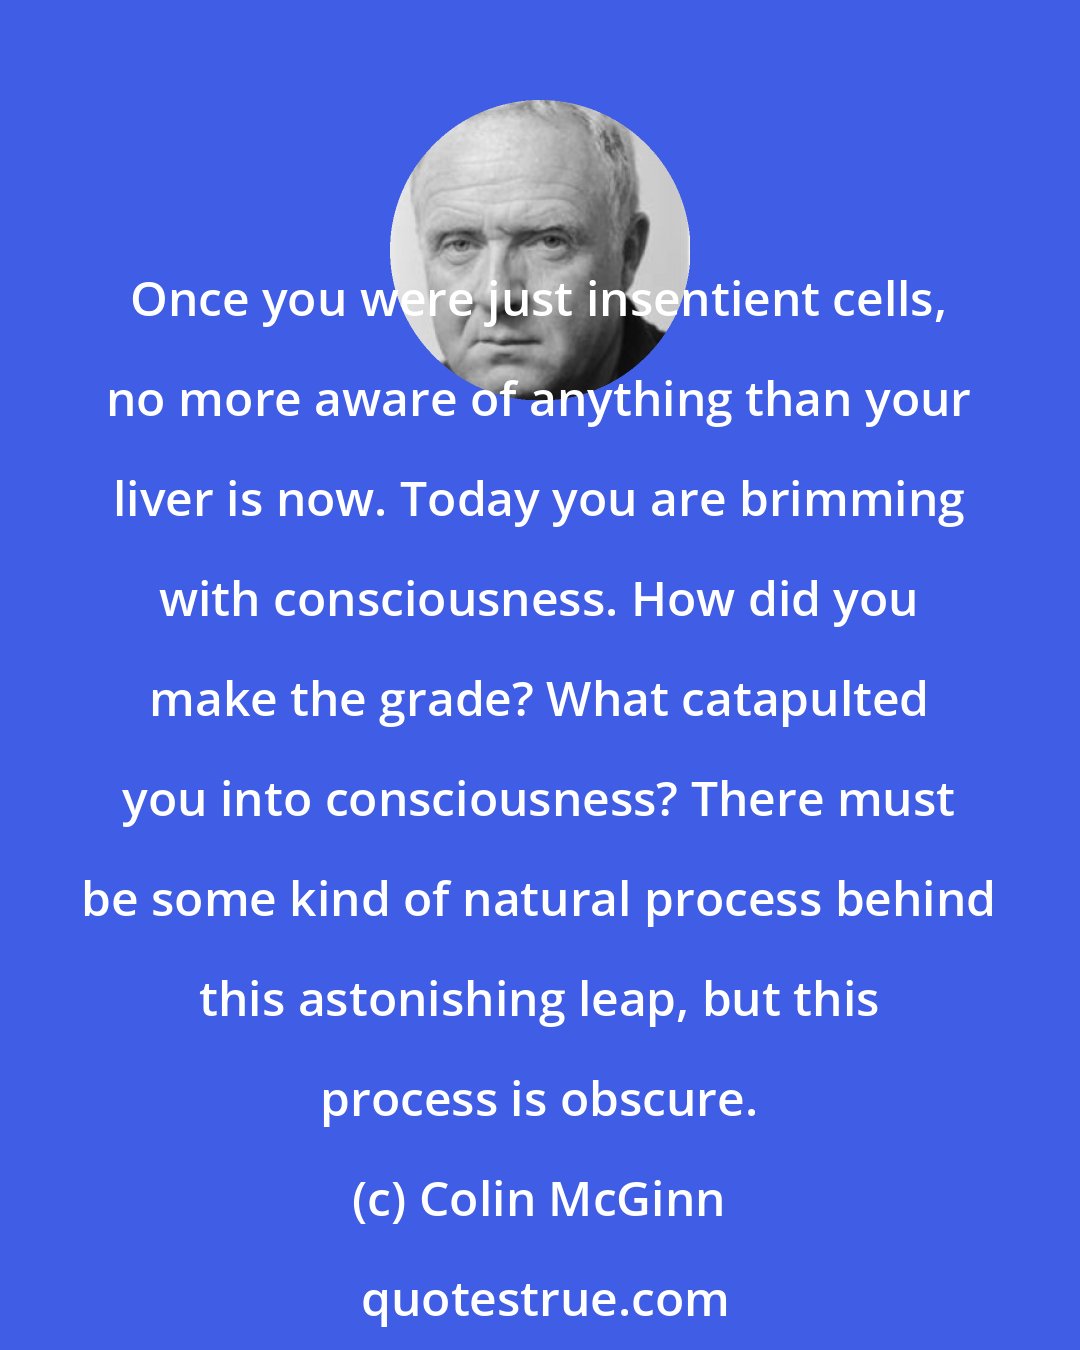 Colin McGinn: Once you were just insentient cells, no more aware of anything than your liver is now. Today you are brimming with consciousness. How did you make the grade? What catapulted you into consciousness? There must be some kind of natural process behind this astonishing leap, but this process is obscure.